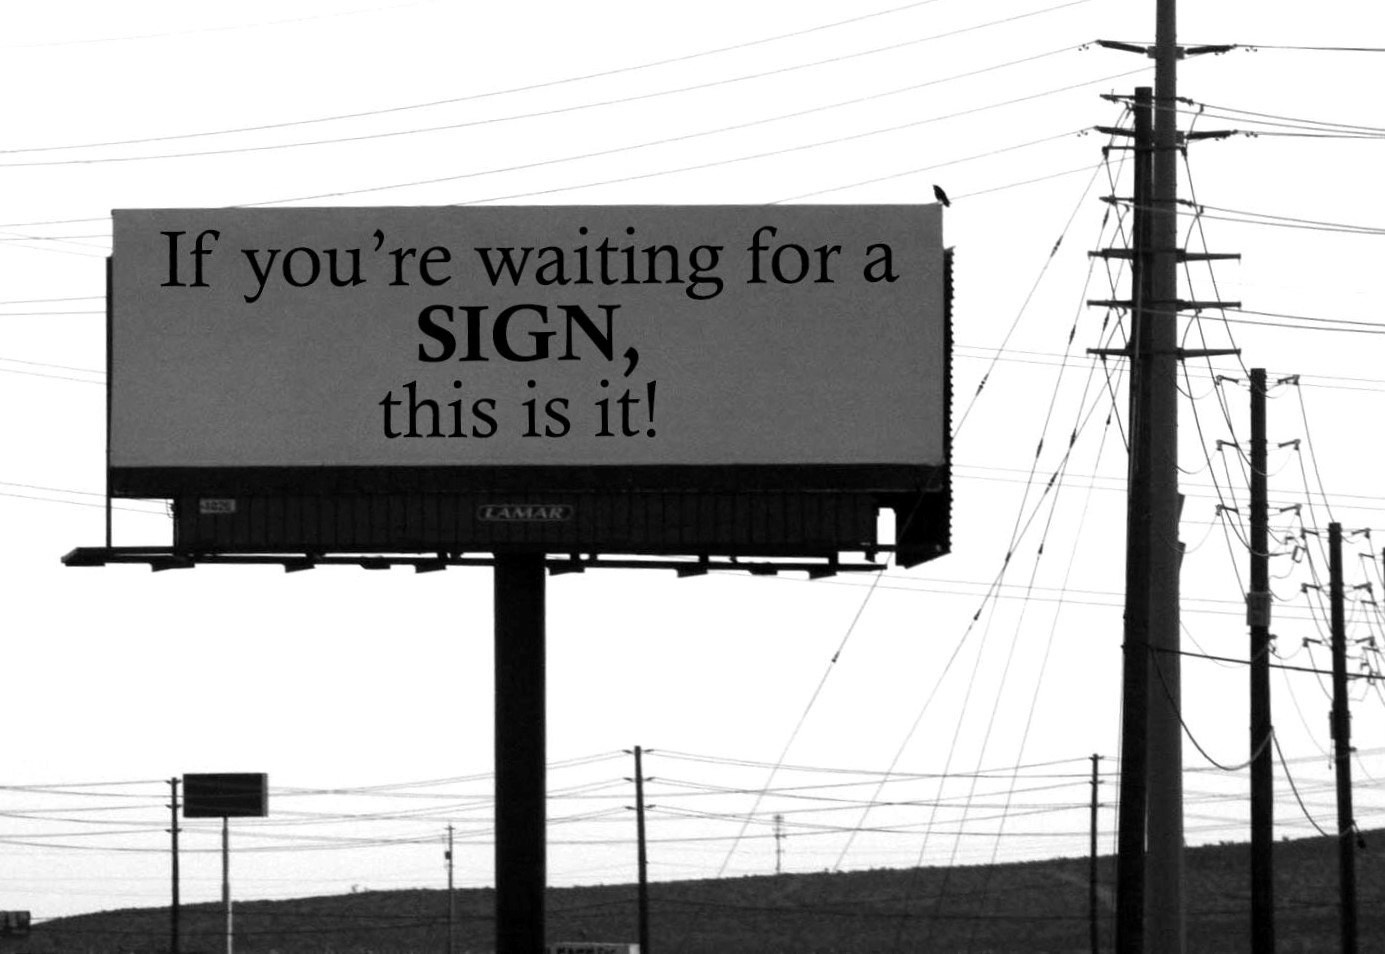 Praying For A Sign